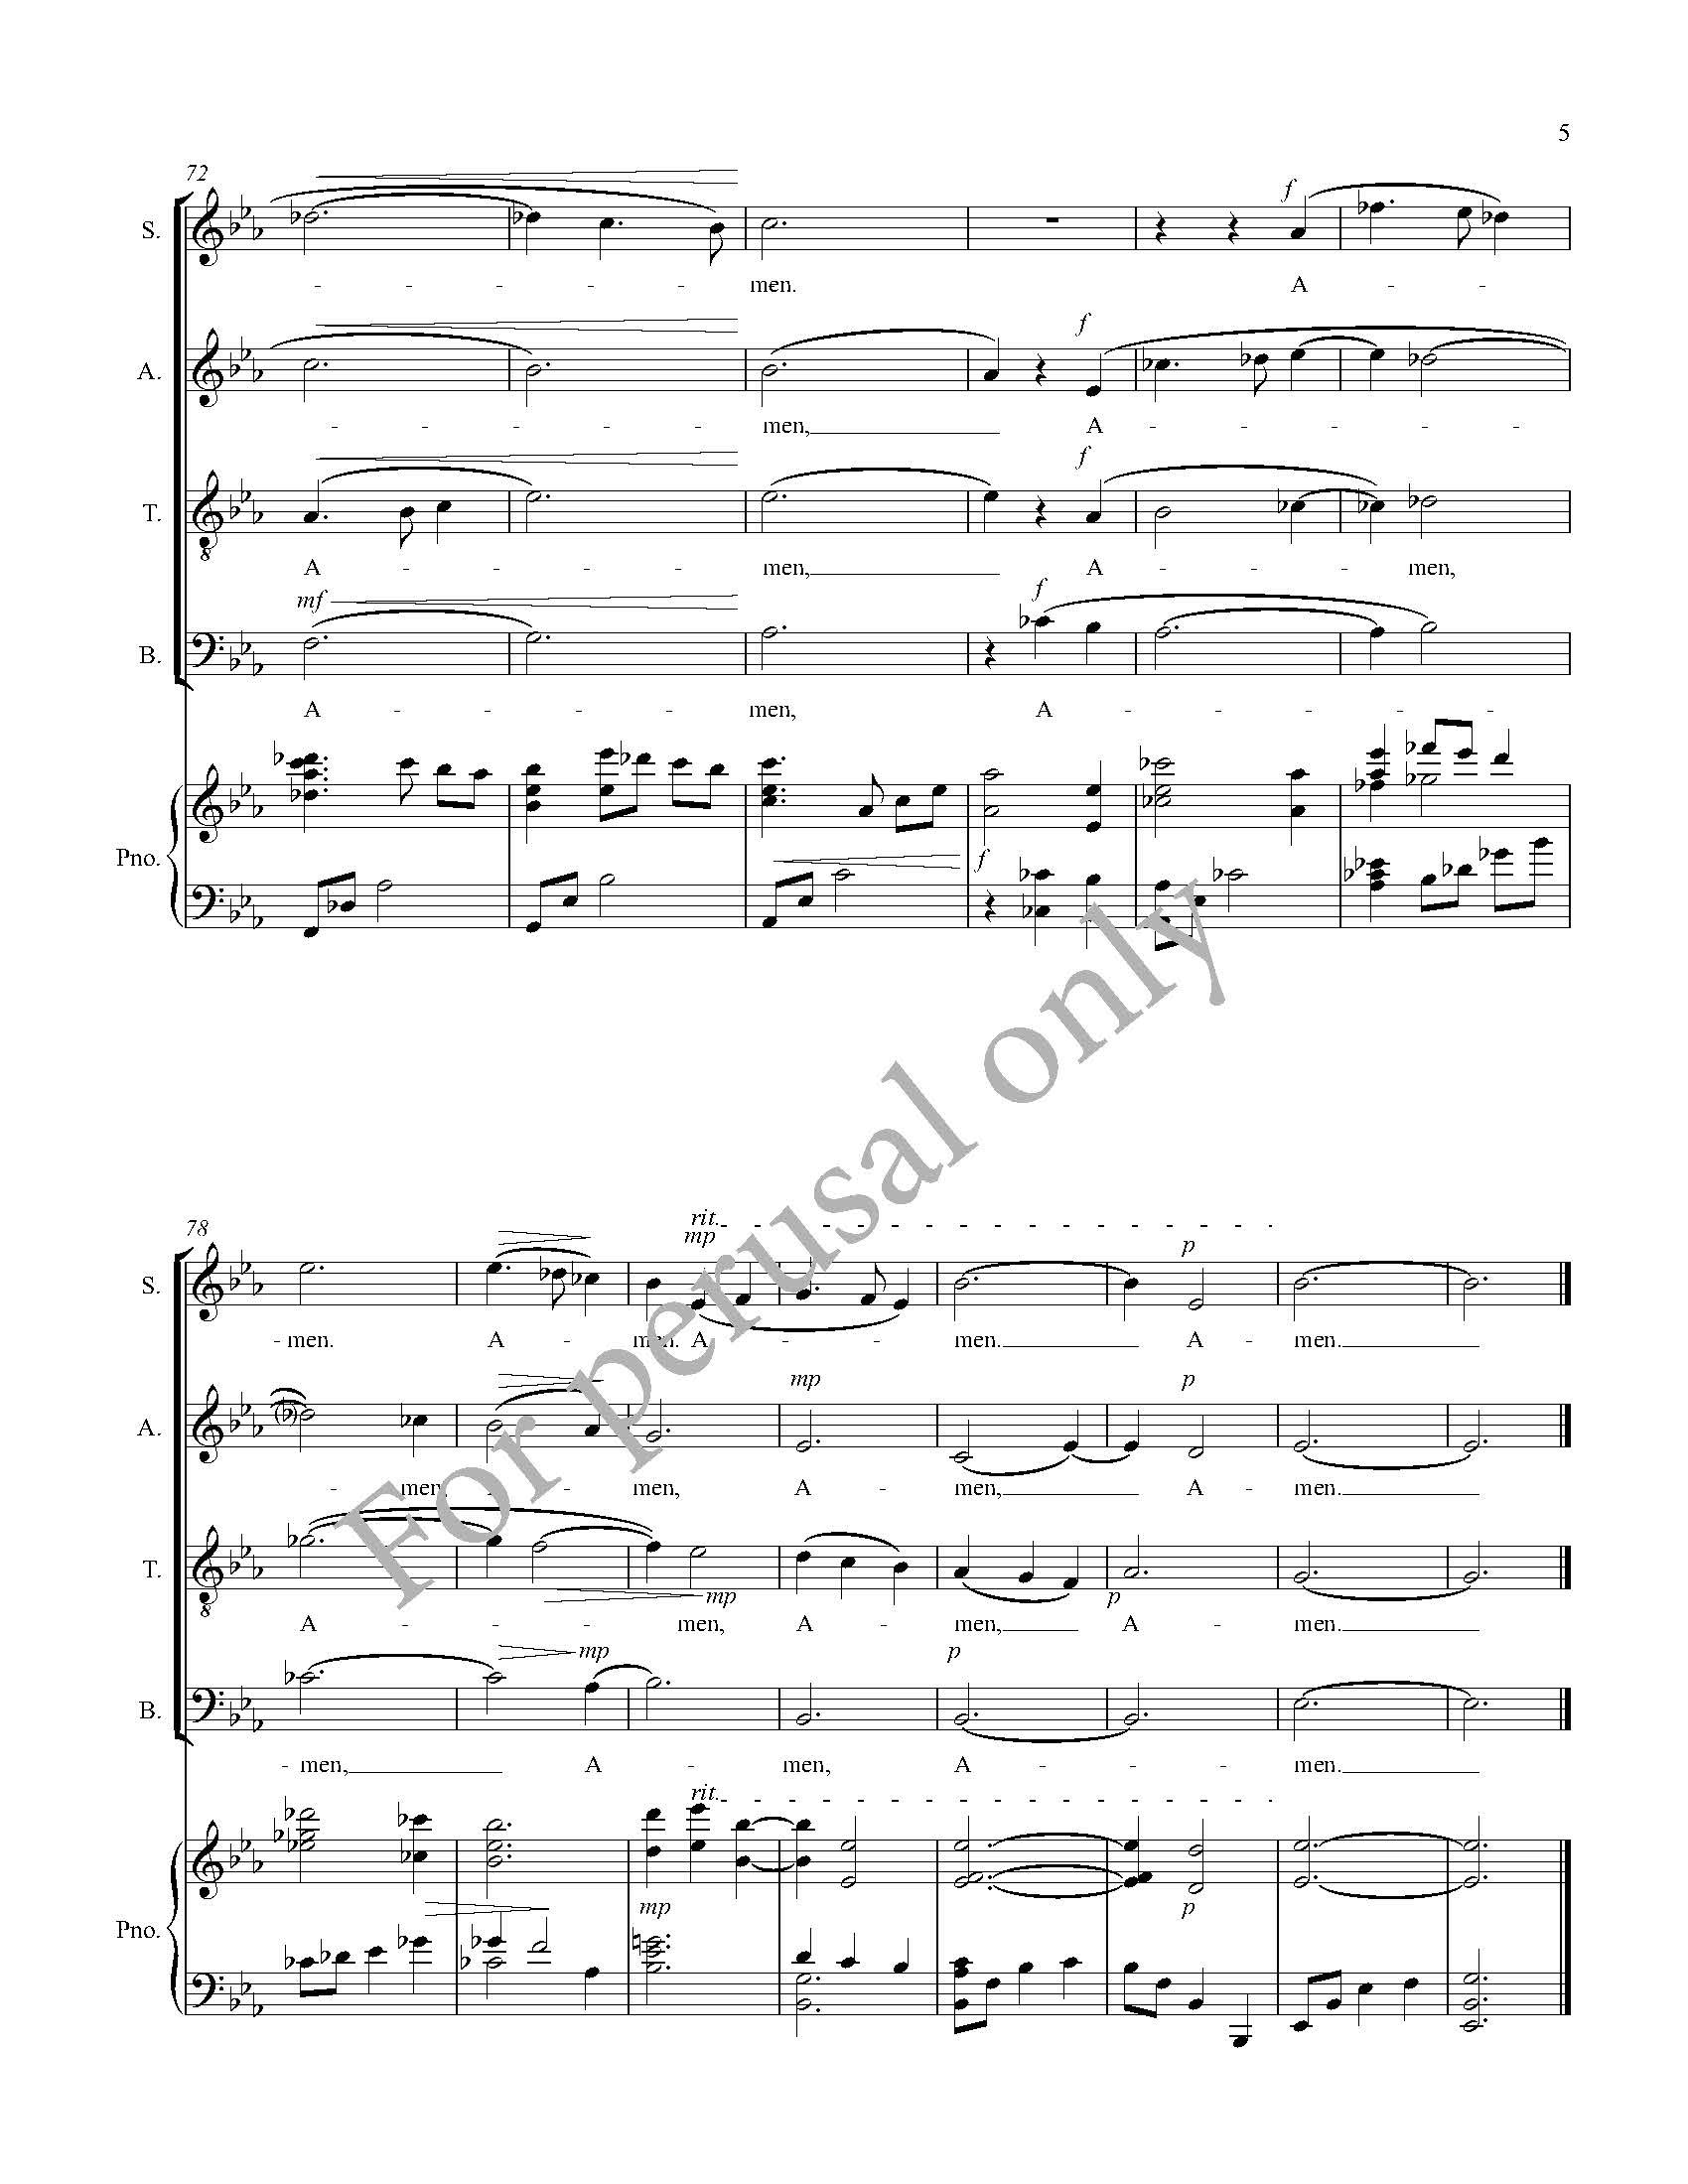 SCORE - preview An Irish Blessing for SATB and piano by Ryan James Brandau_Page_5.jpg